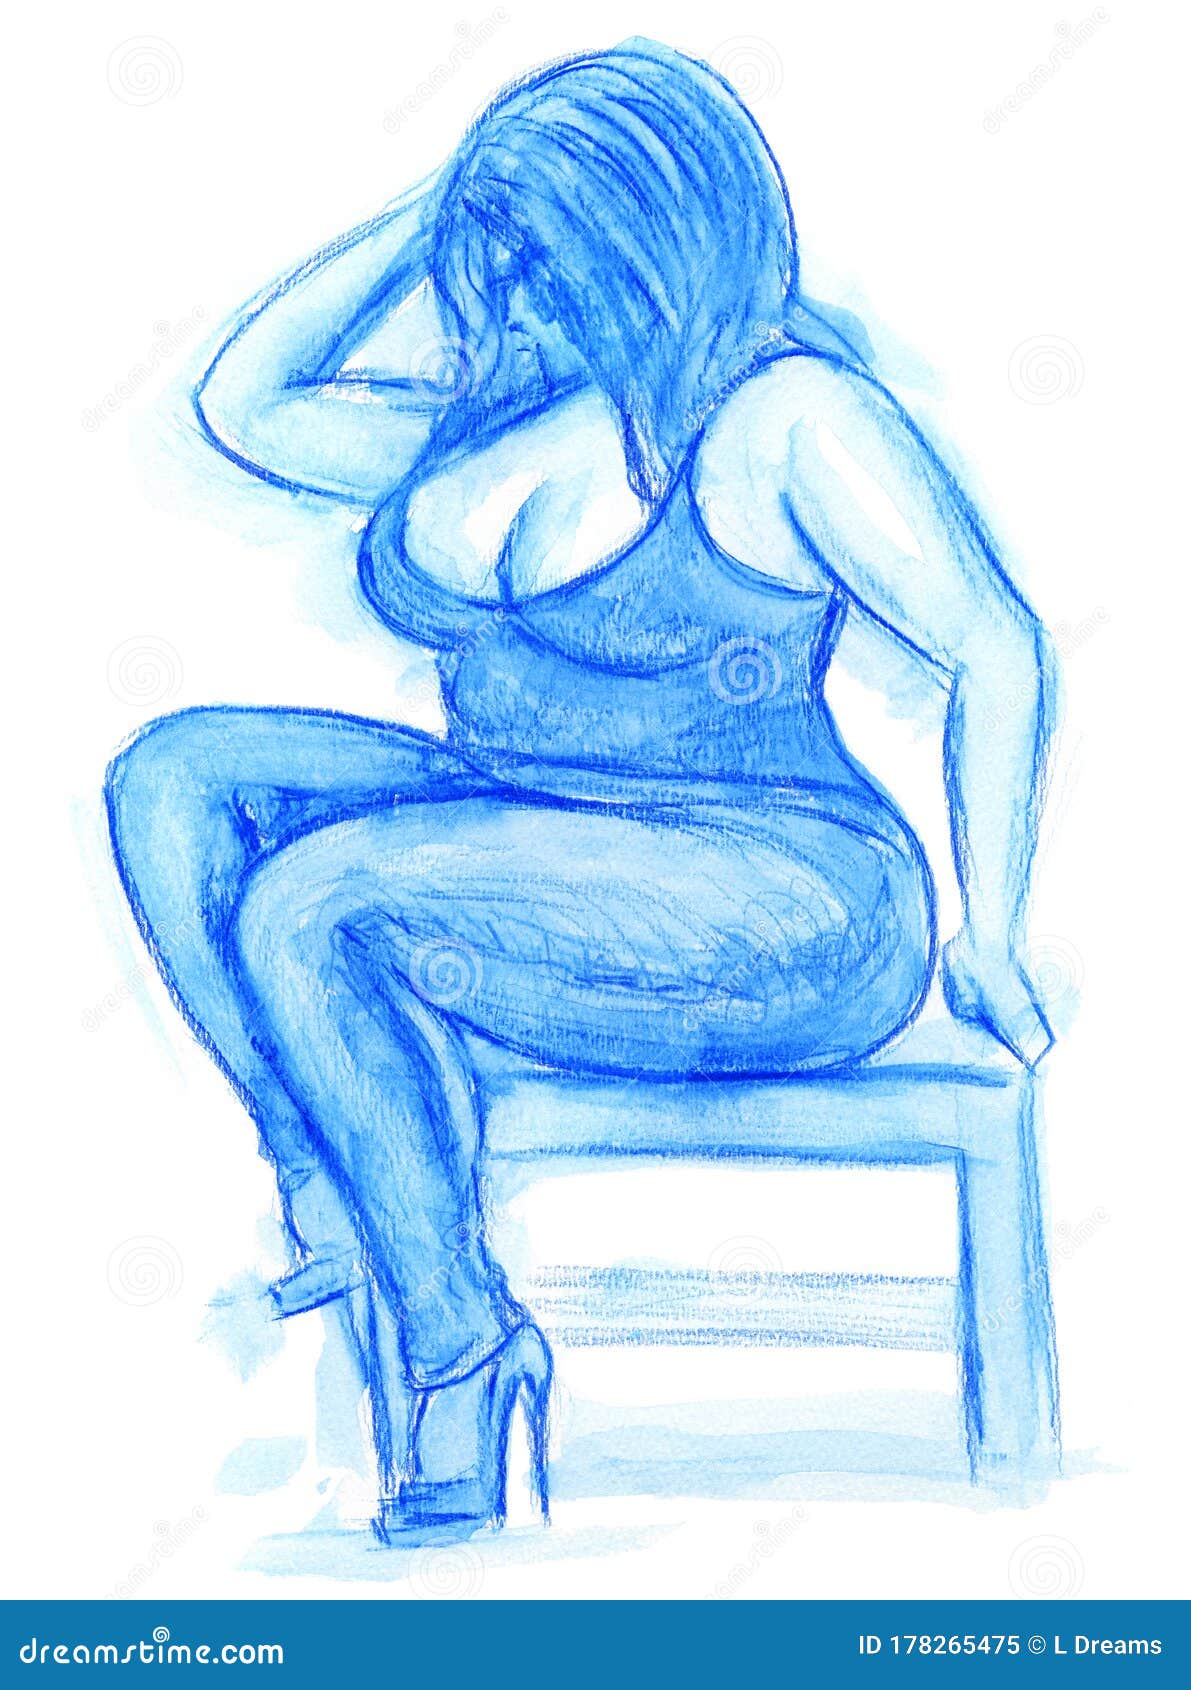 Plus Size Fashion Influencer in Blue Jeans Illustration Stock Illustration - Illustration of erotica, curves: